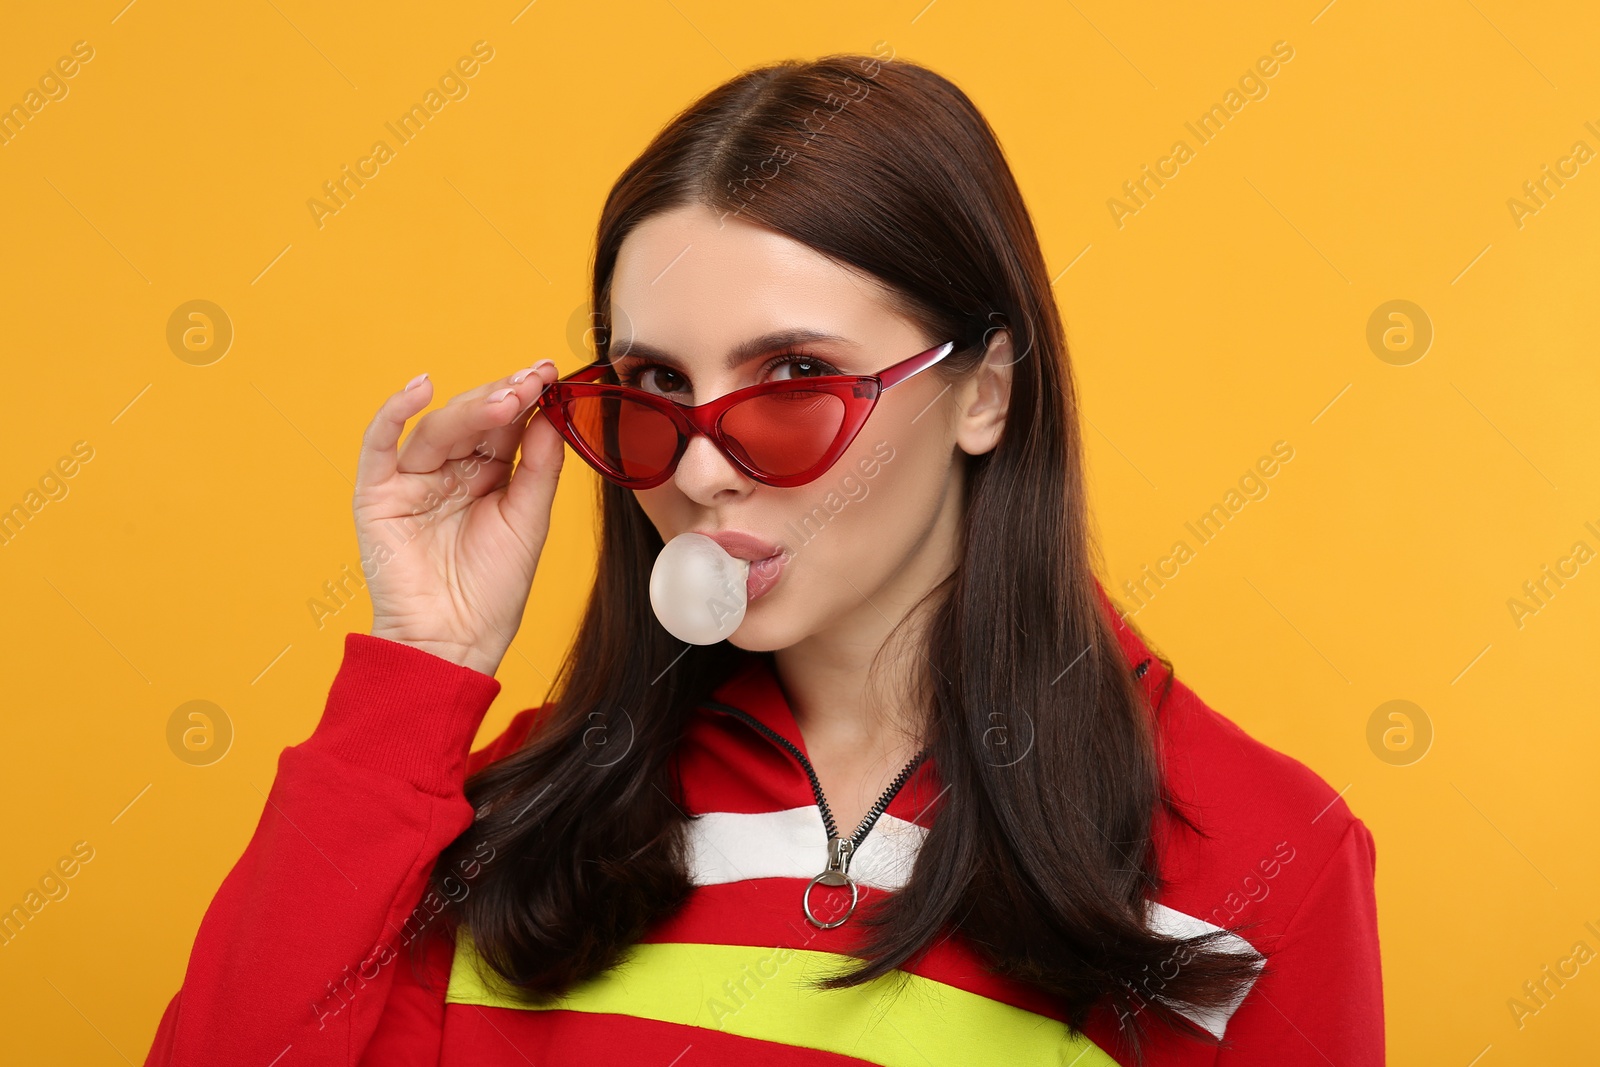 Photo of Beautiful woman in sunglasses blowing bubble gum on orange background